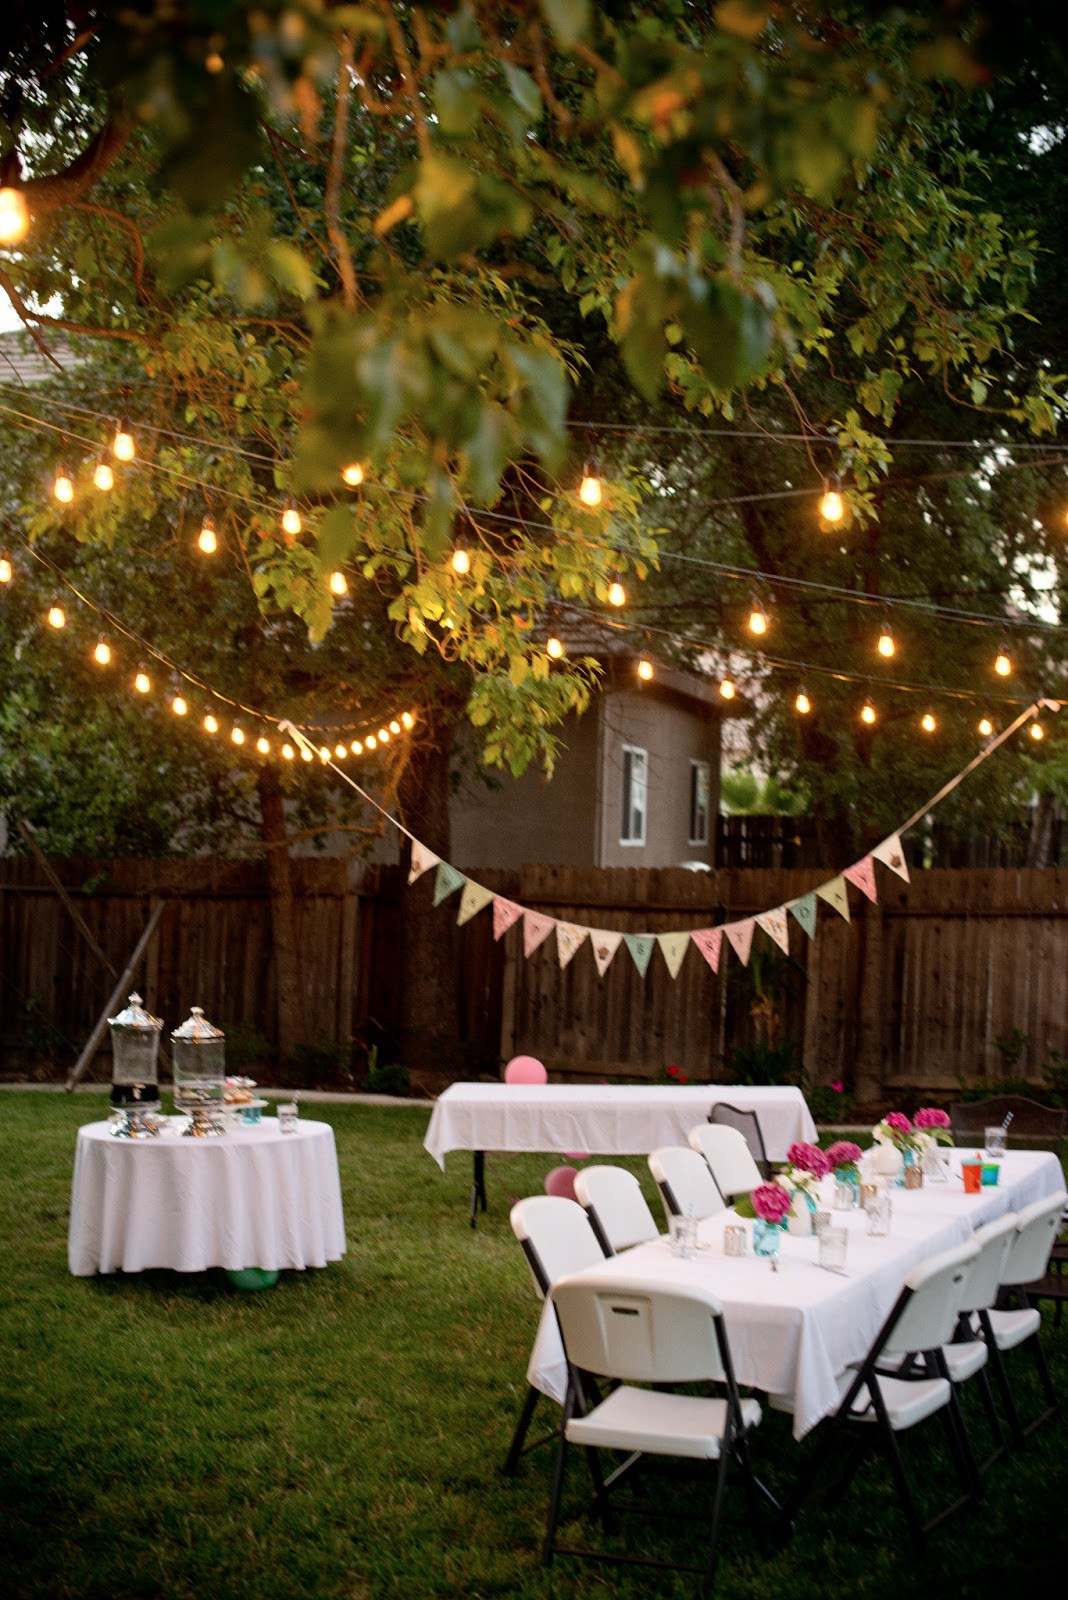 Ideas To Decorate Backyard For Engagement Party
 Domestic Fashionista Backyard Birthday Fun Pink